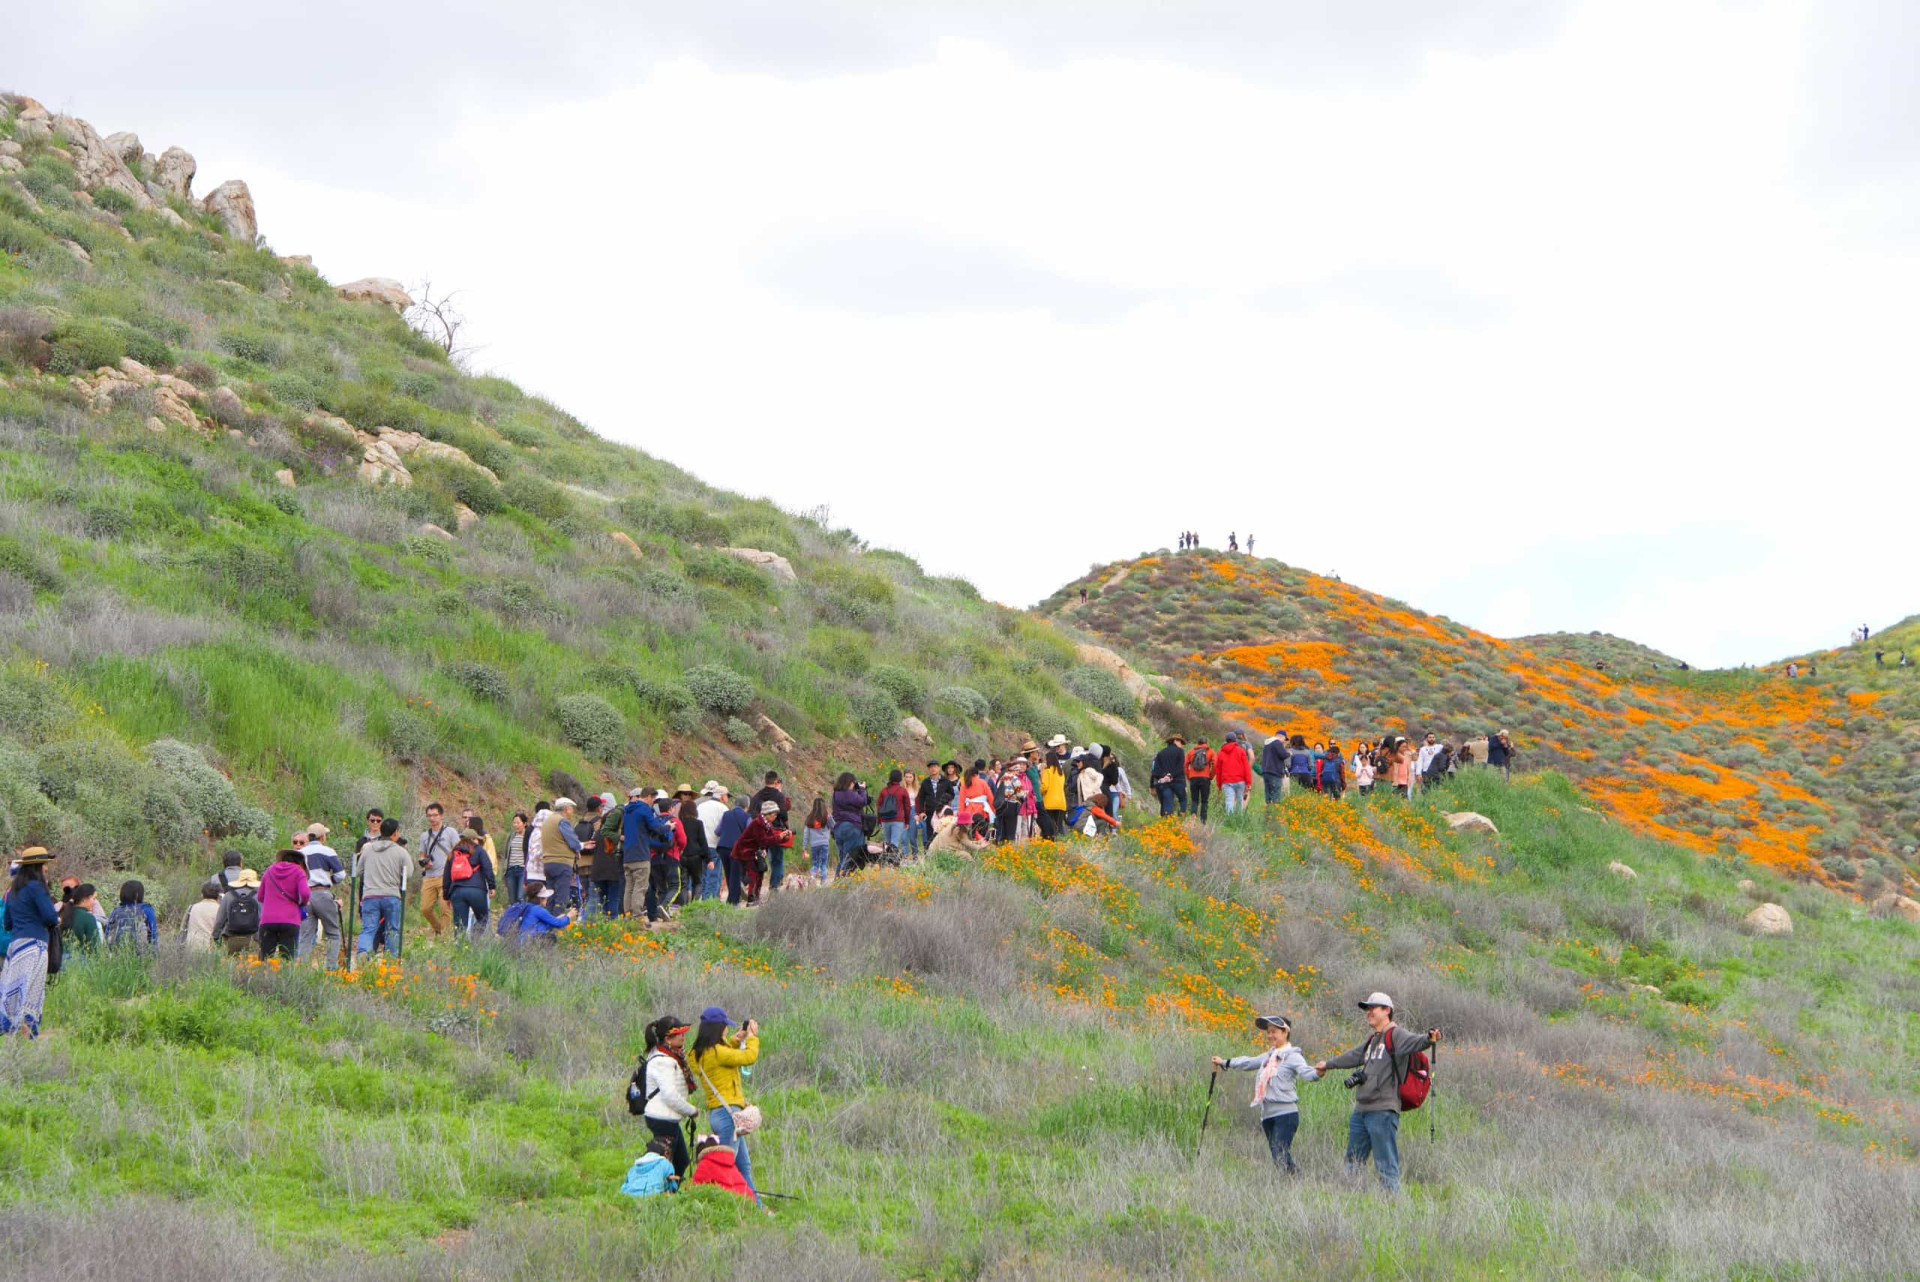 <p>In February 2019, thousands of people flocked to Walker Canyon in California to witness a "super bloom" of poppies. Over 50,000 tourists descended on the canyon, leading local authorities to temporarily close the area down to appease residents and reduce traffic flow.</p><p>You may also like: </p>